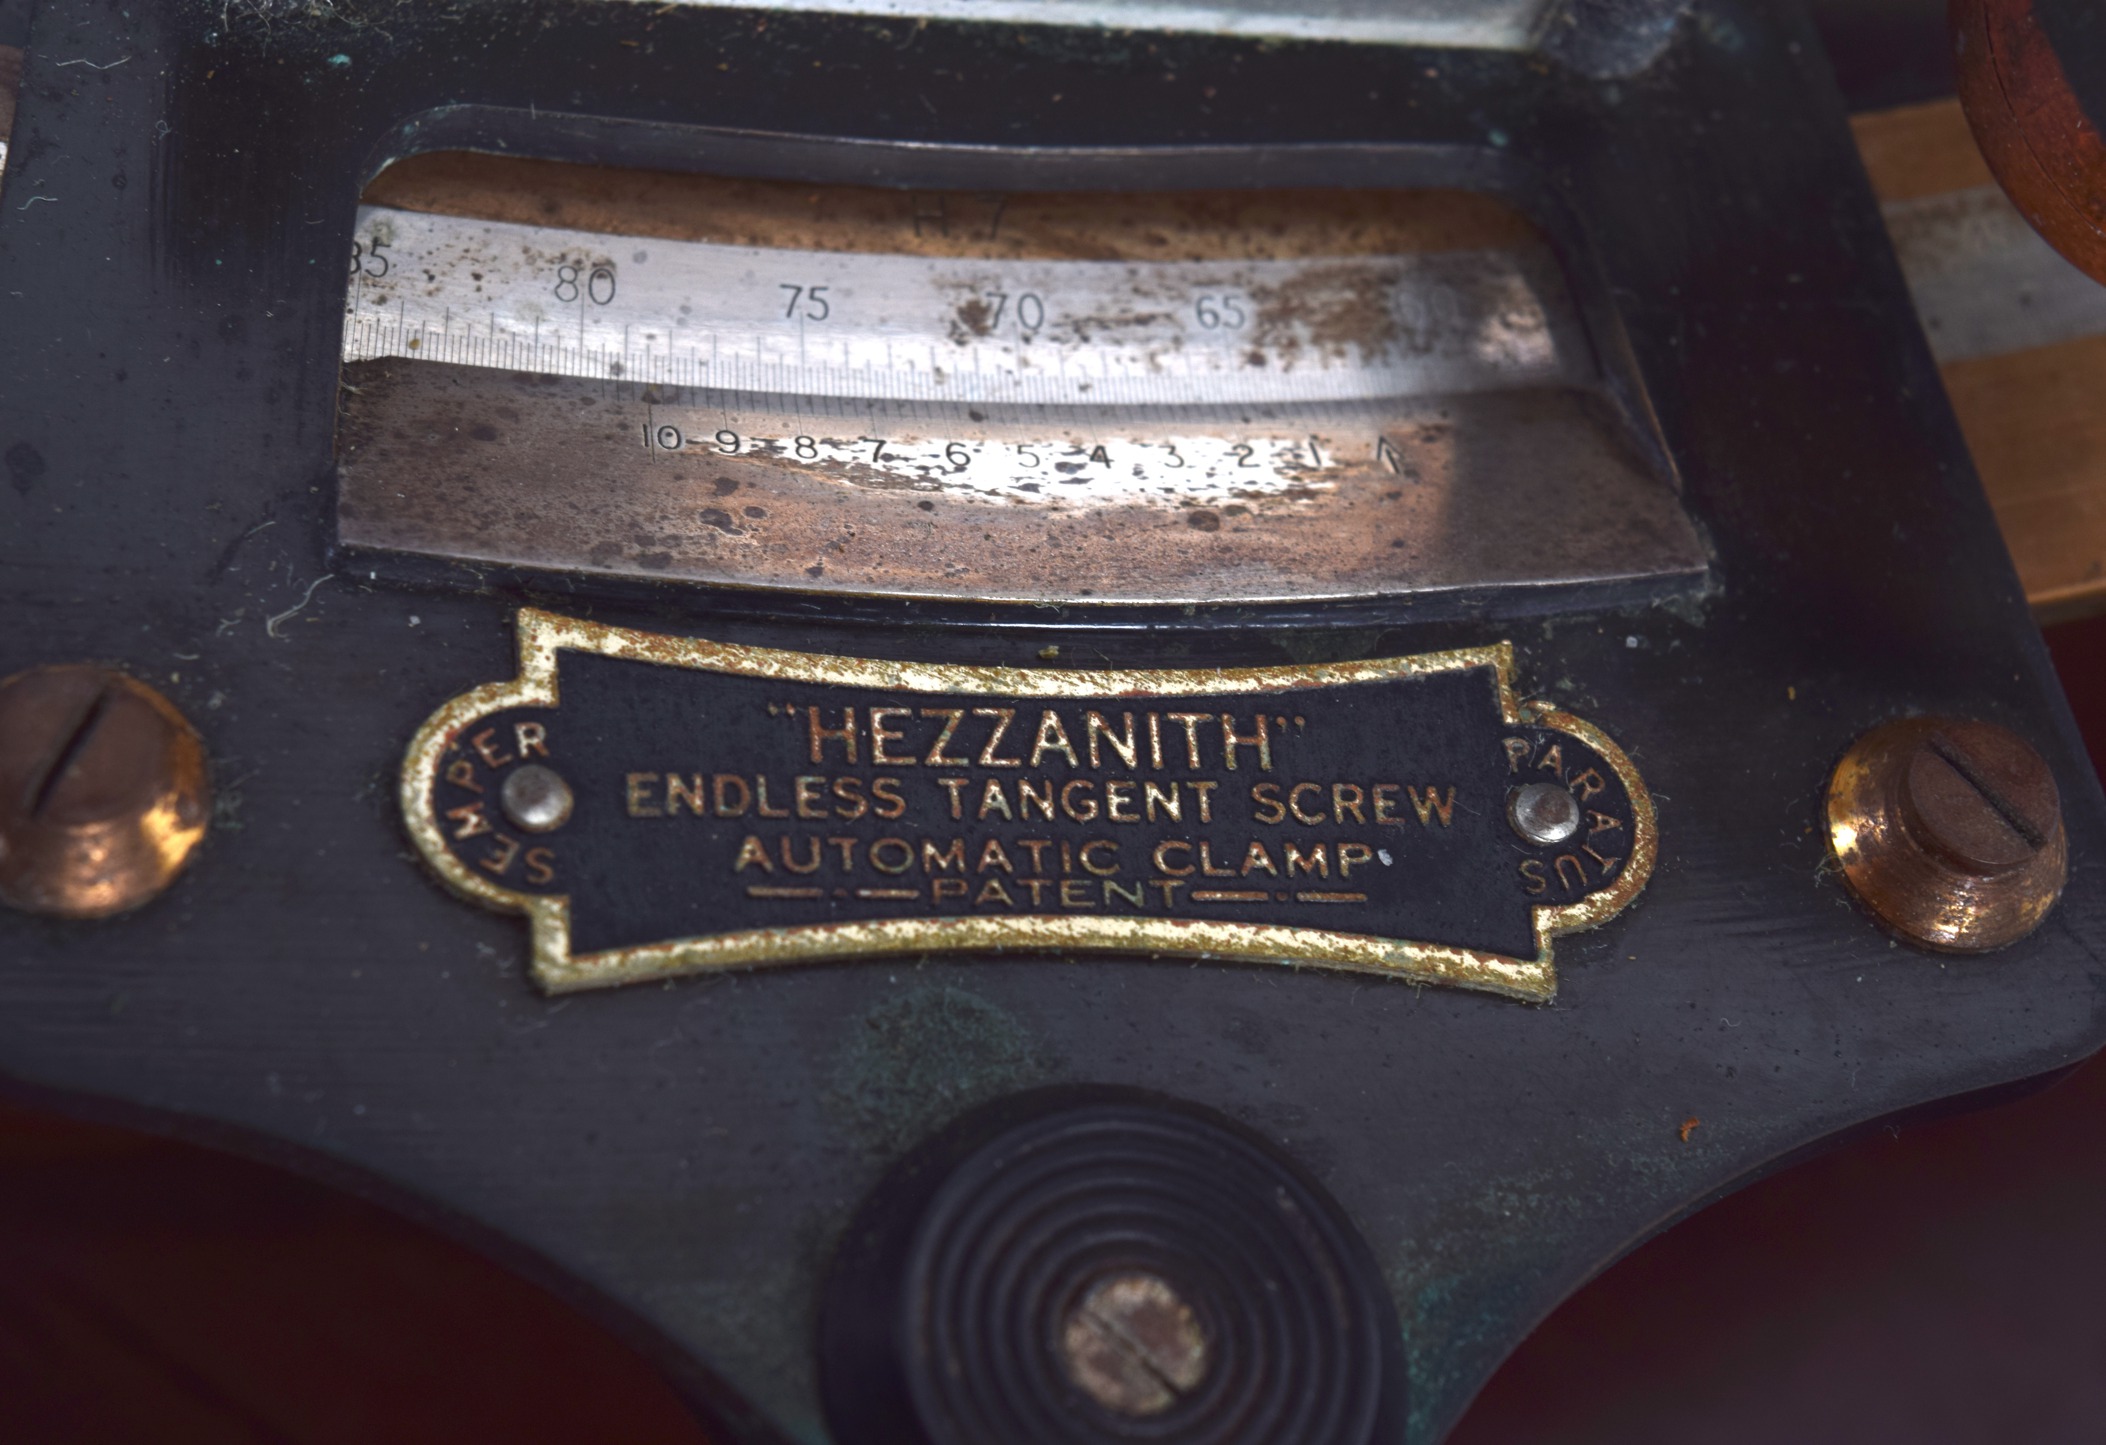 A CASED HEATH & CO OF LONDON HEZZANITH AUTOMATIC CLAMPING INSTRUMENT. 18 cm x 21 cm. - Image 3 of 4